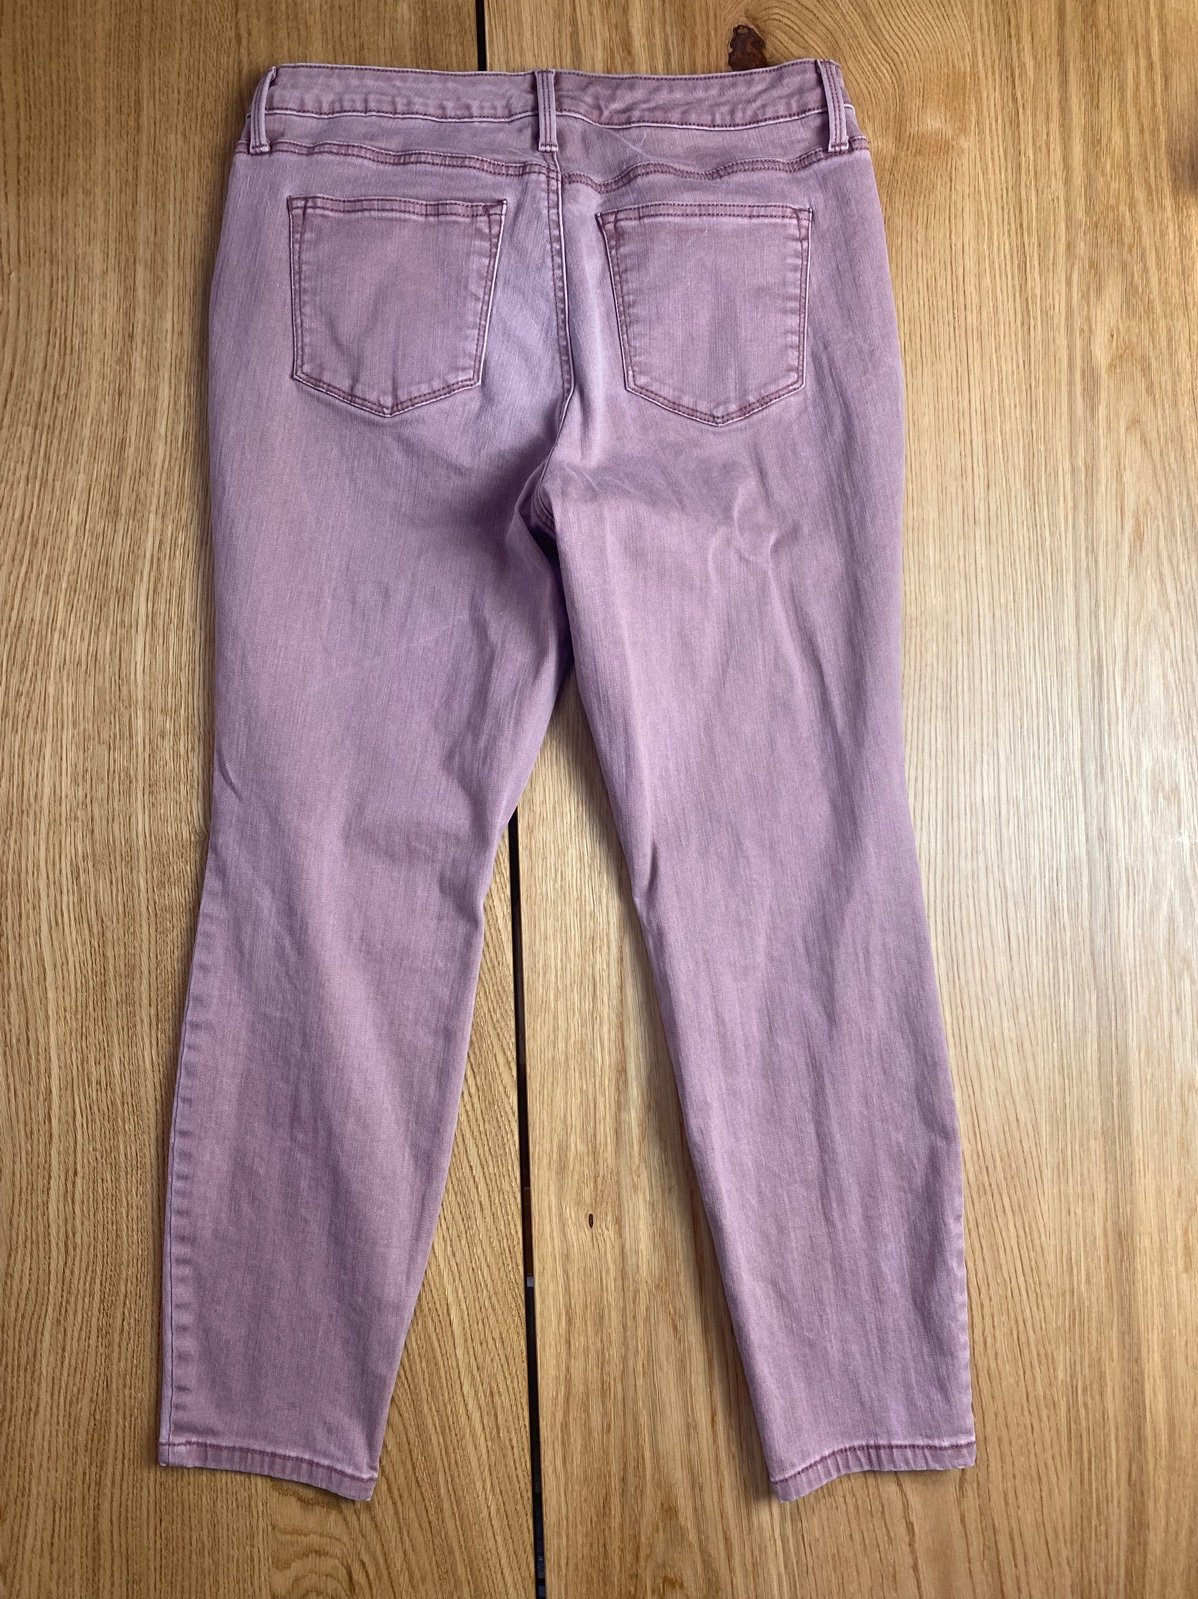 Perfect New Directions Blush Pink Skinny Ankle Jeans GzS0VRVYS Zero Profit 